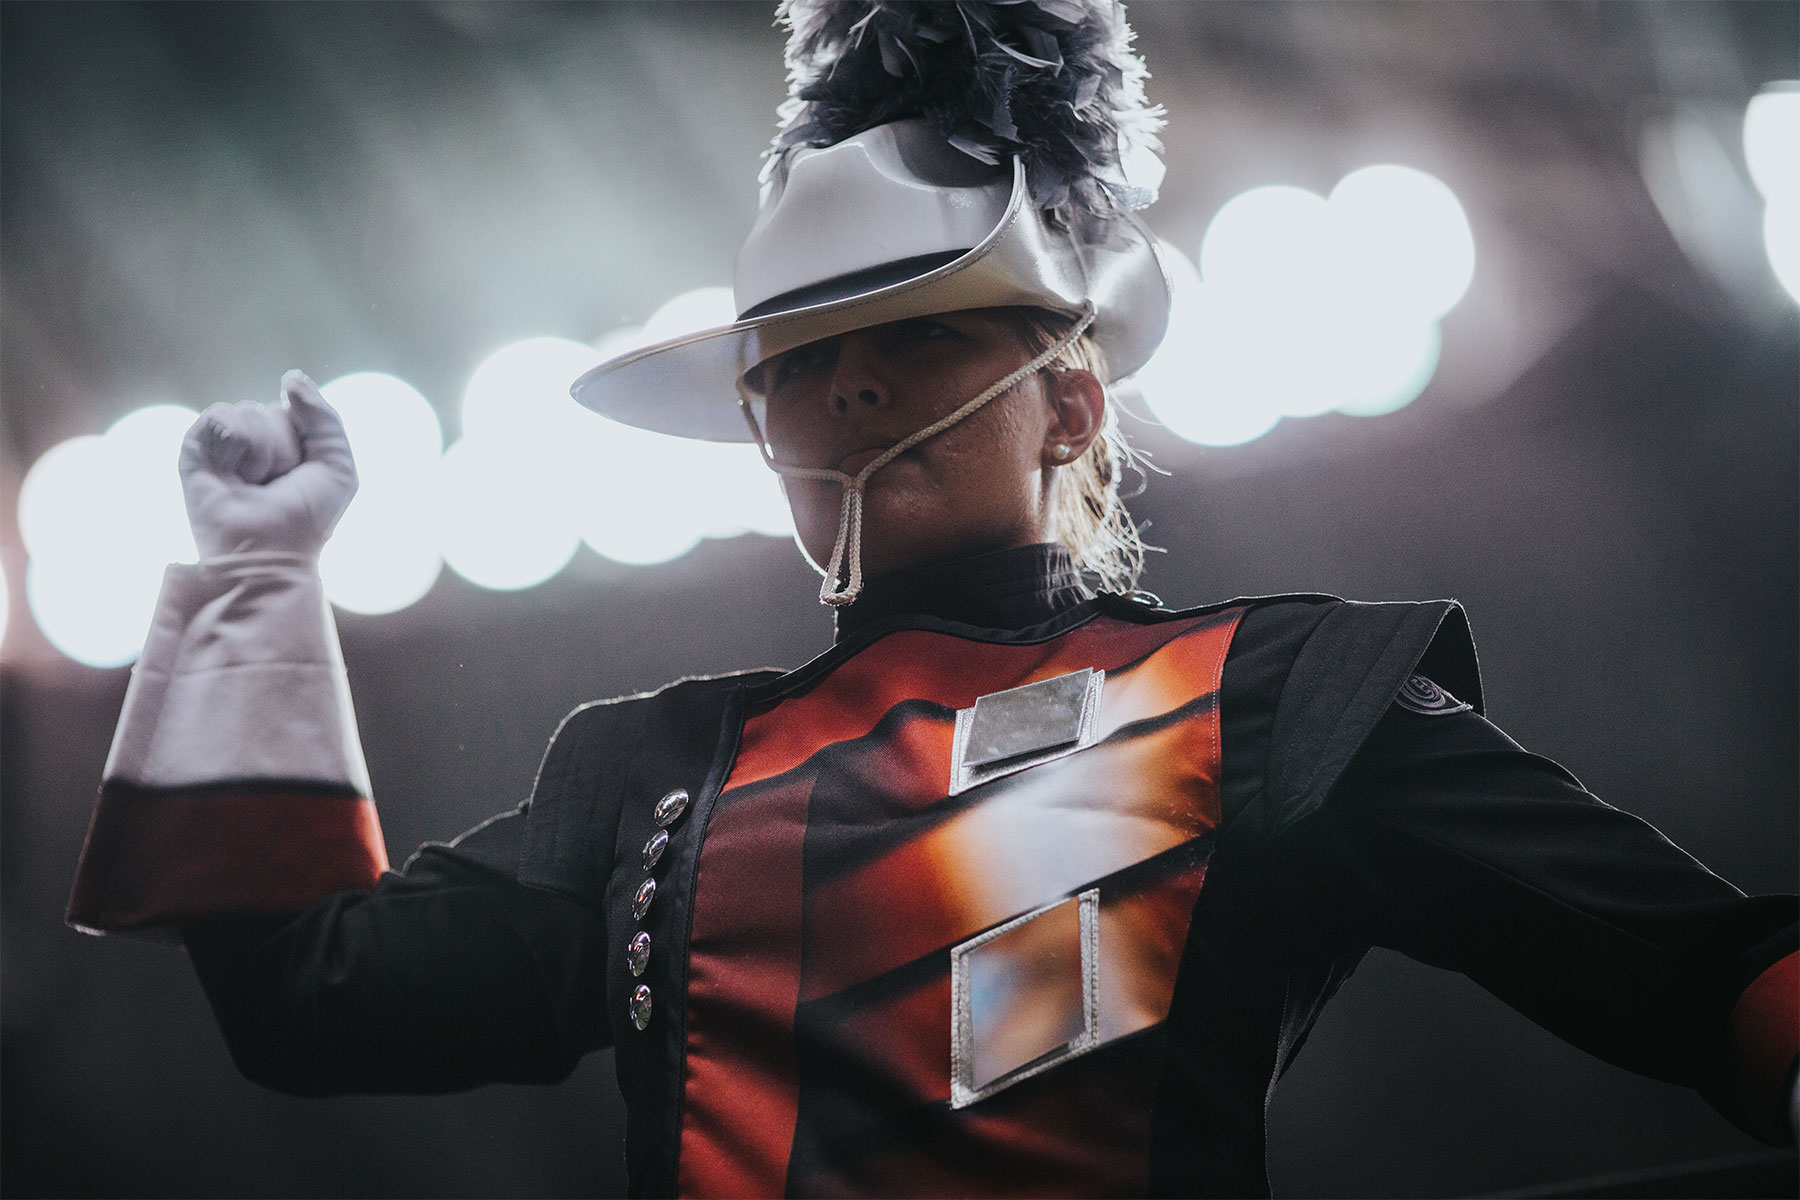 Crossmen Drum and Bugle Corps is an extended family